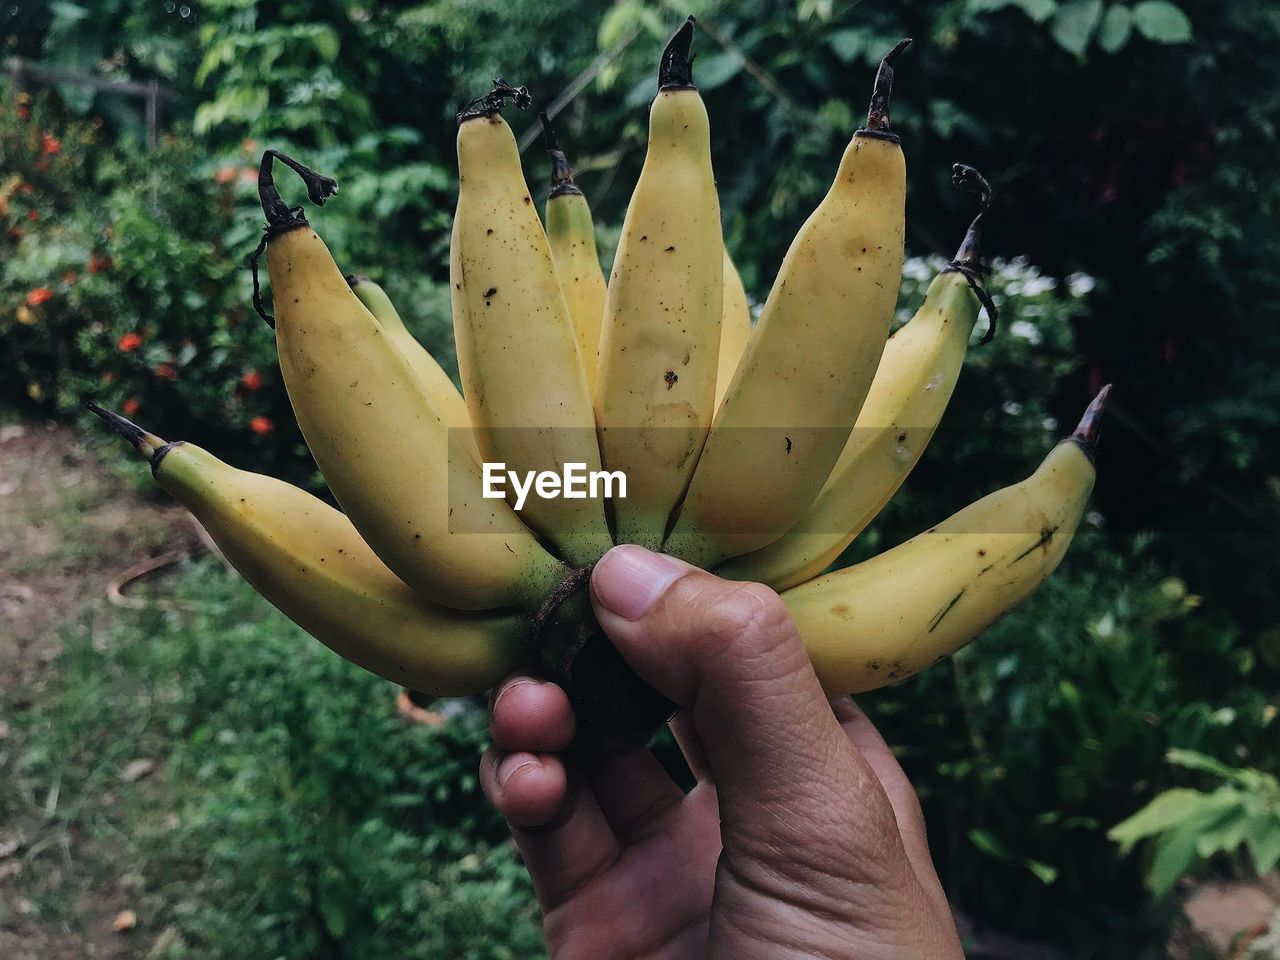 Cropped hand holding bananas against plants